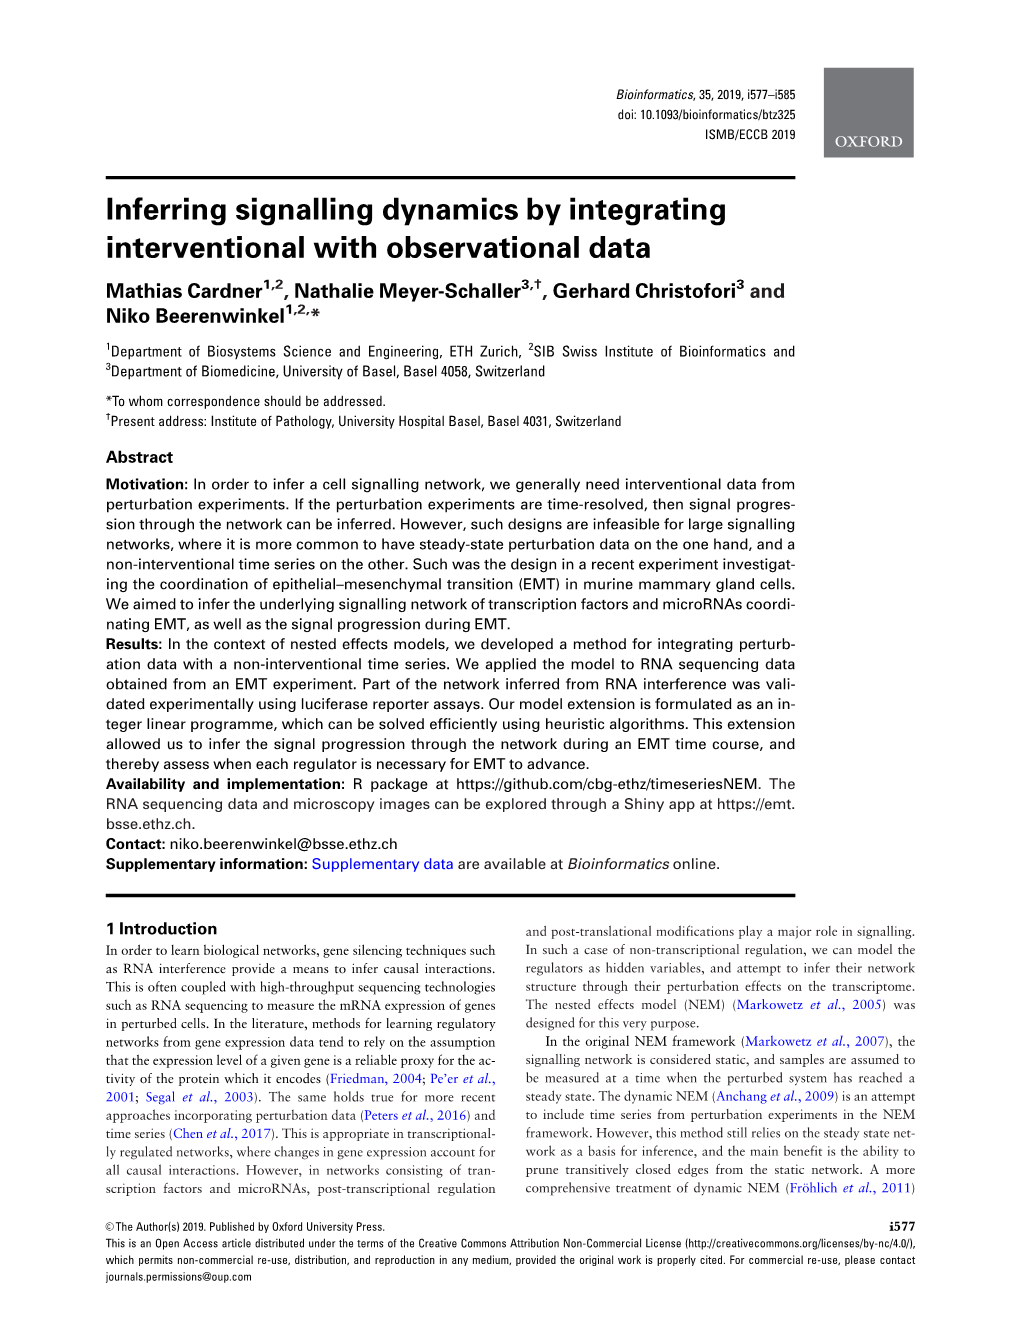 Inferring Signalling Dynamics by Integrating Interventional With